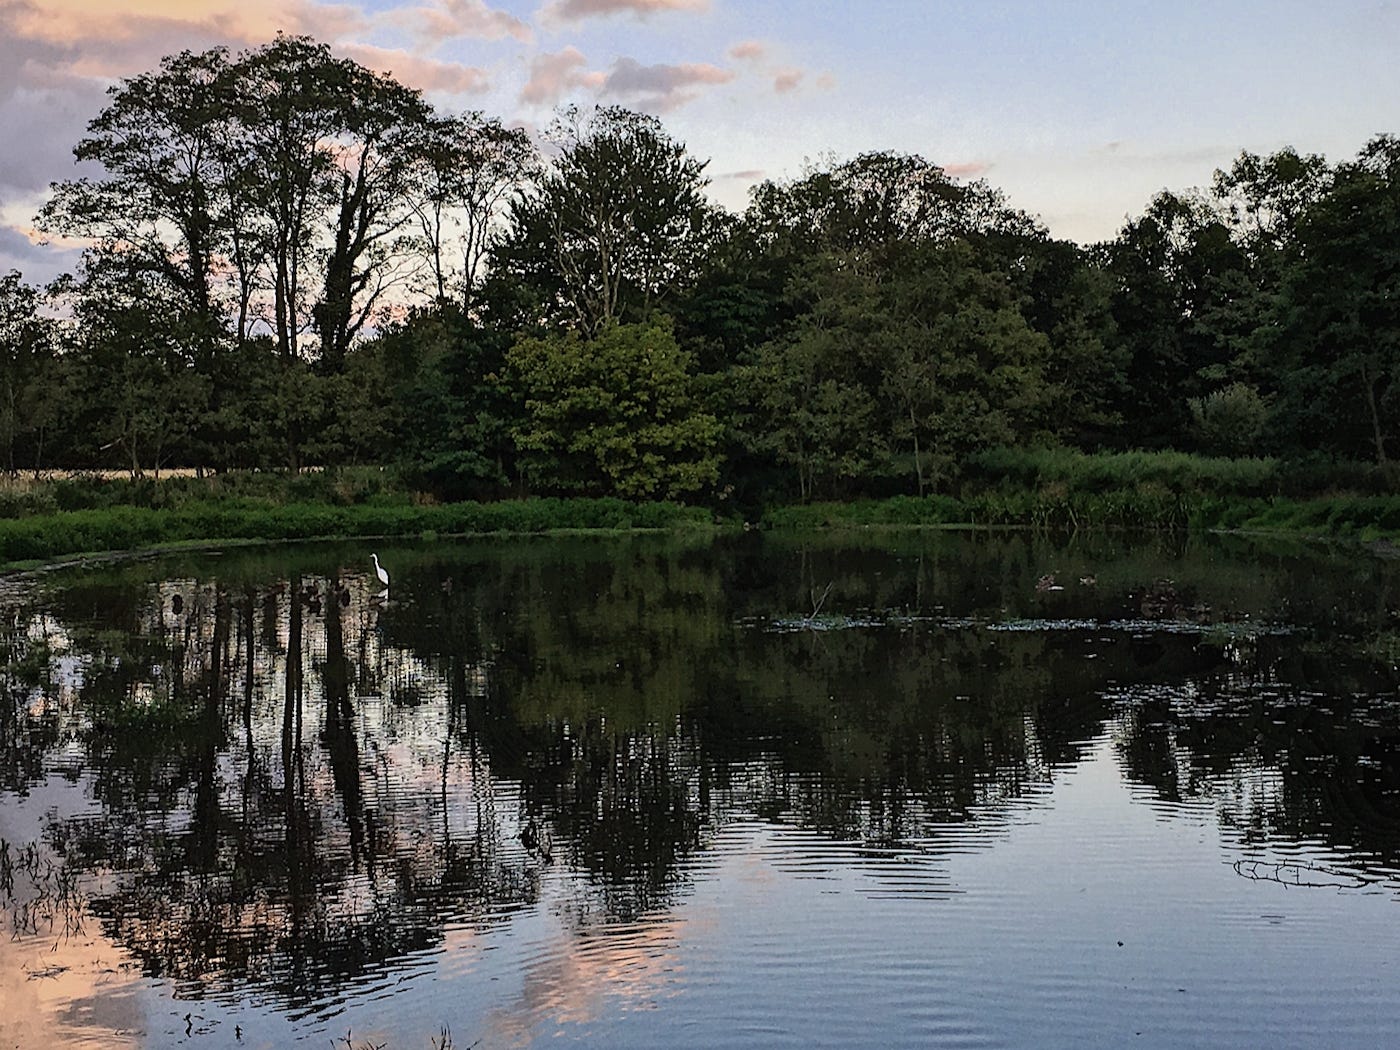 The pond at the Farminary, with a heron standing in the distance and the trees reflected in the water